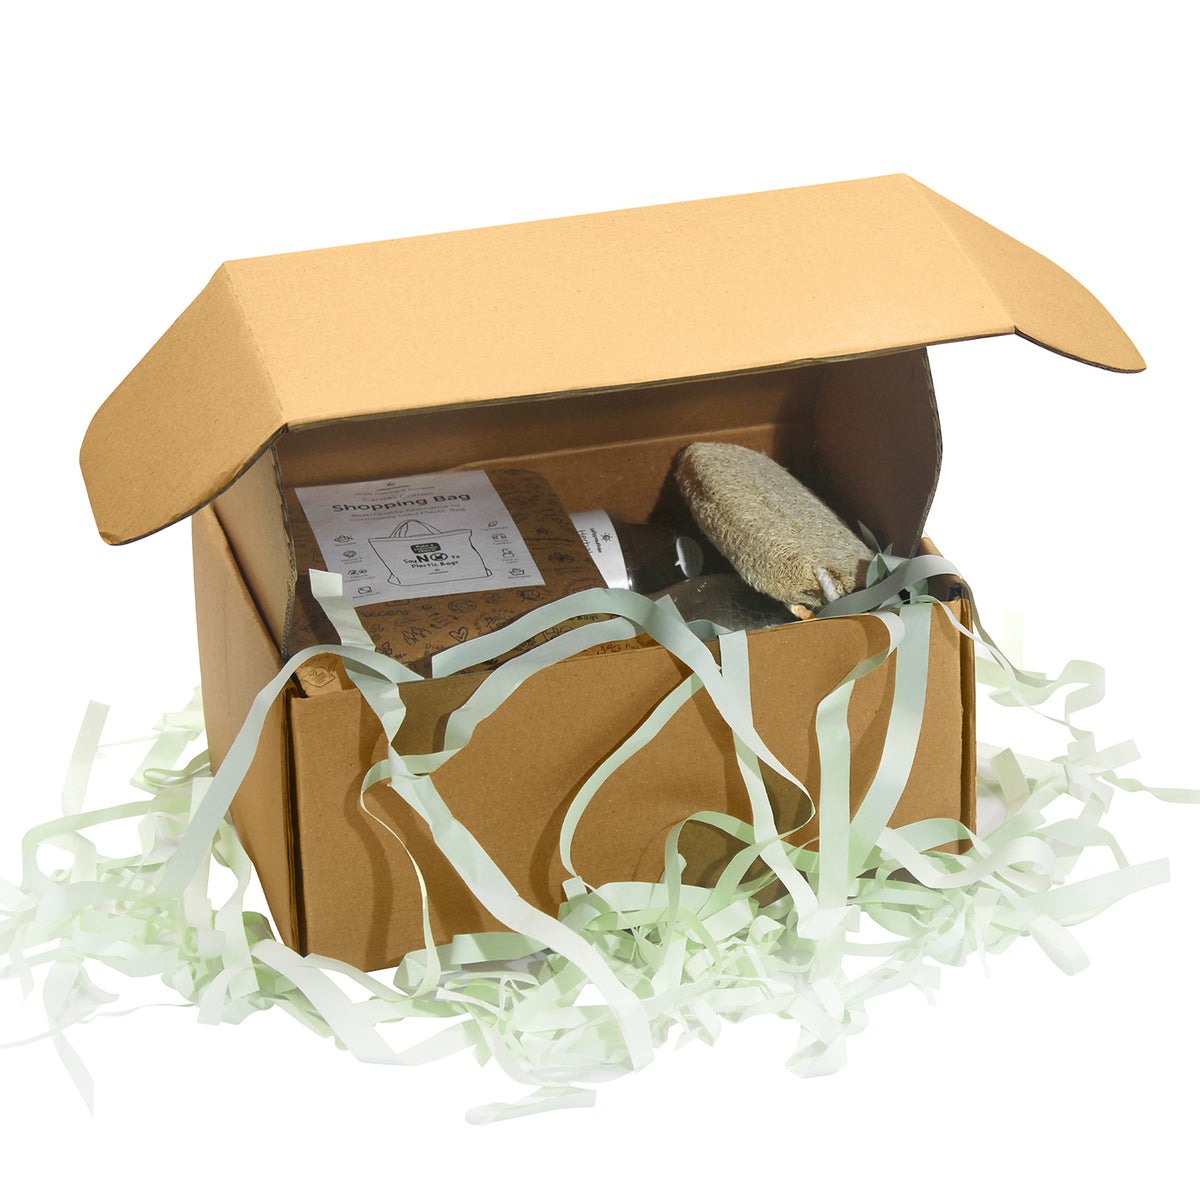 Satvic Kitchen Essentials Gift Hamper - Eco-Conscious Gift pack for Sustainable Living